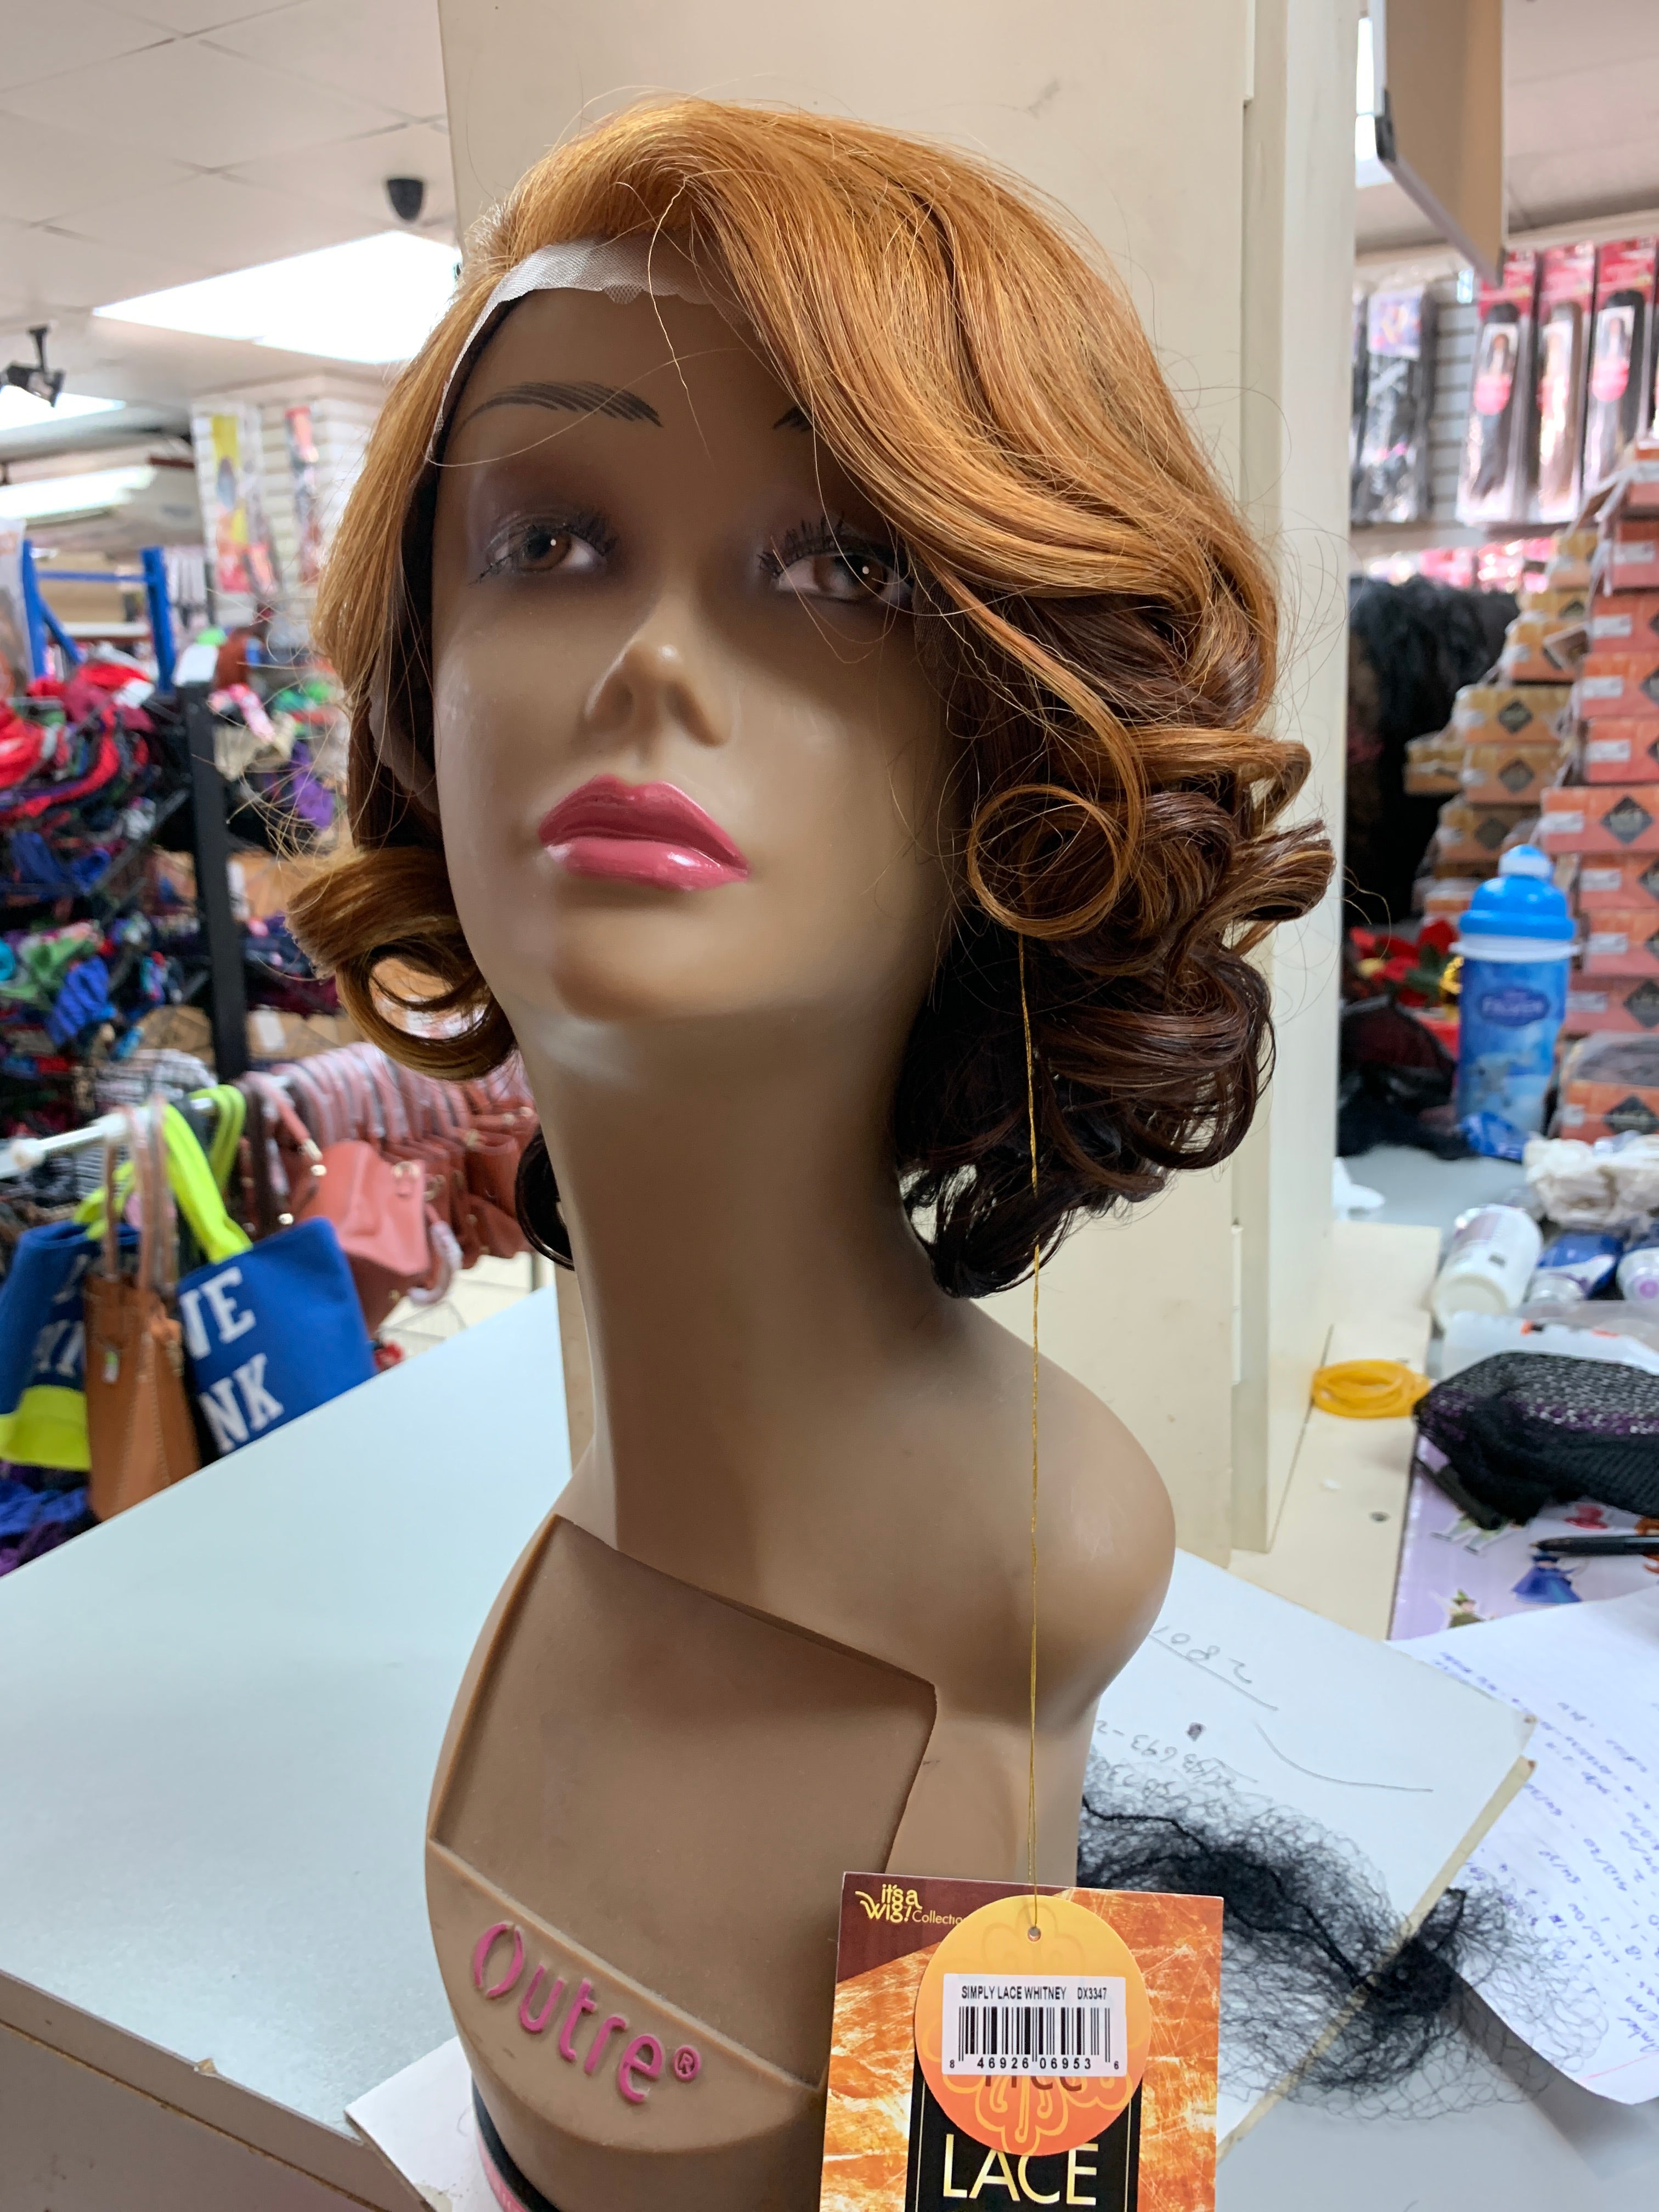 It’s a wig simply lace whitney